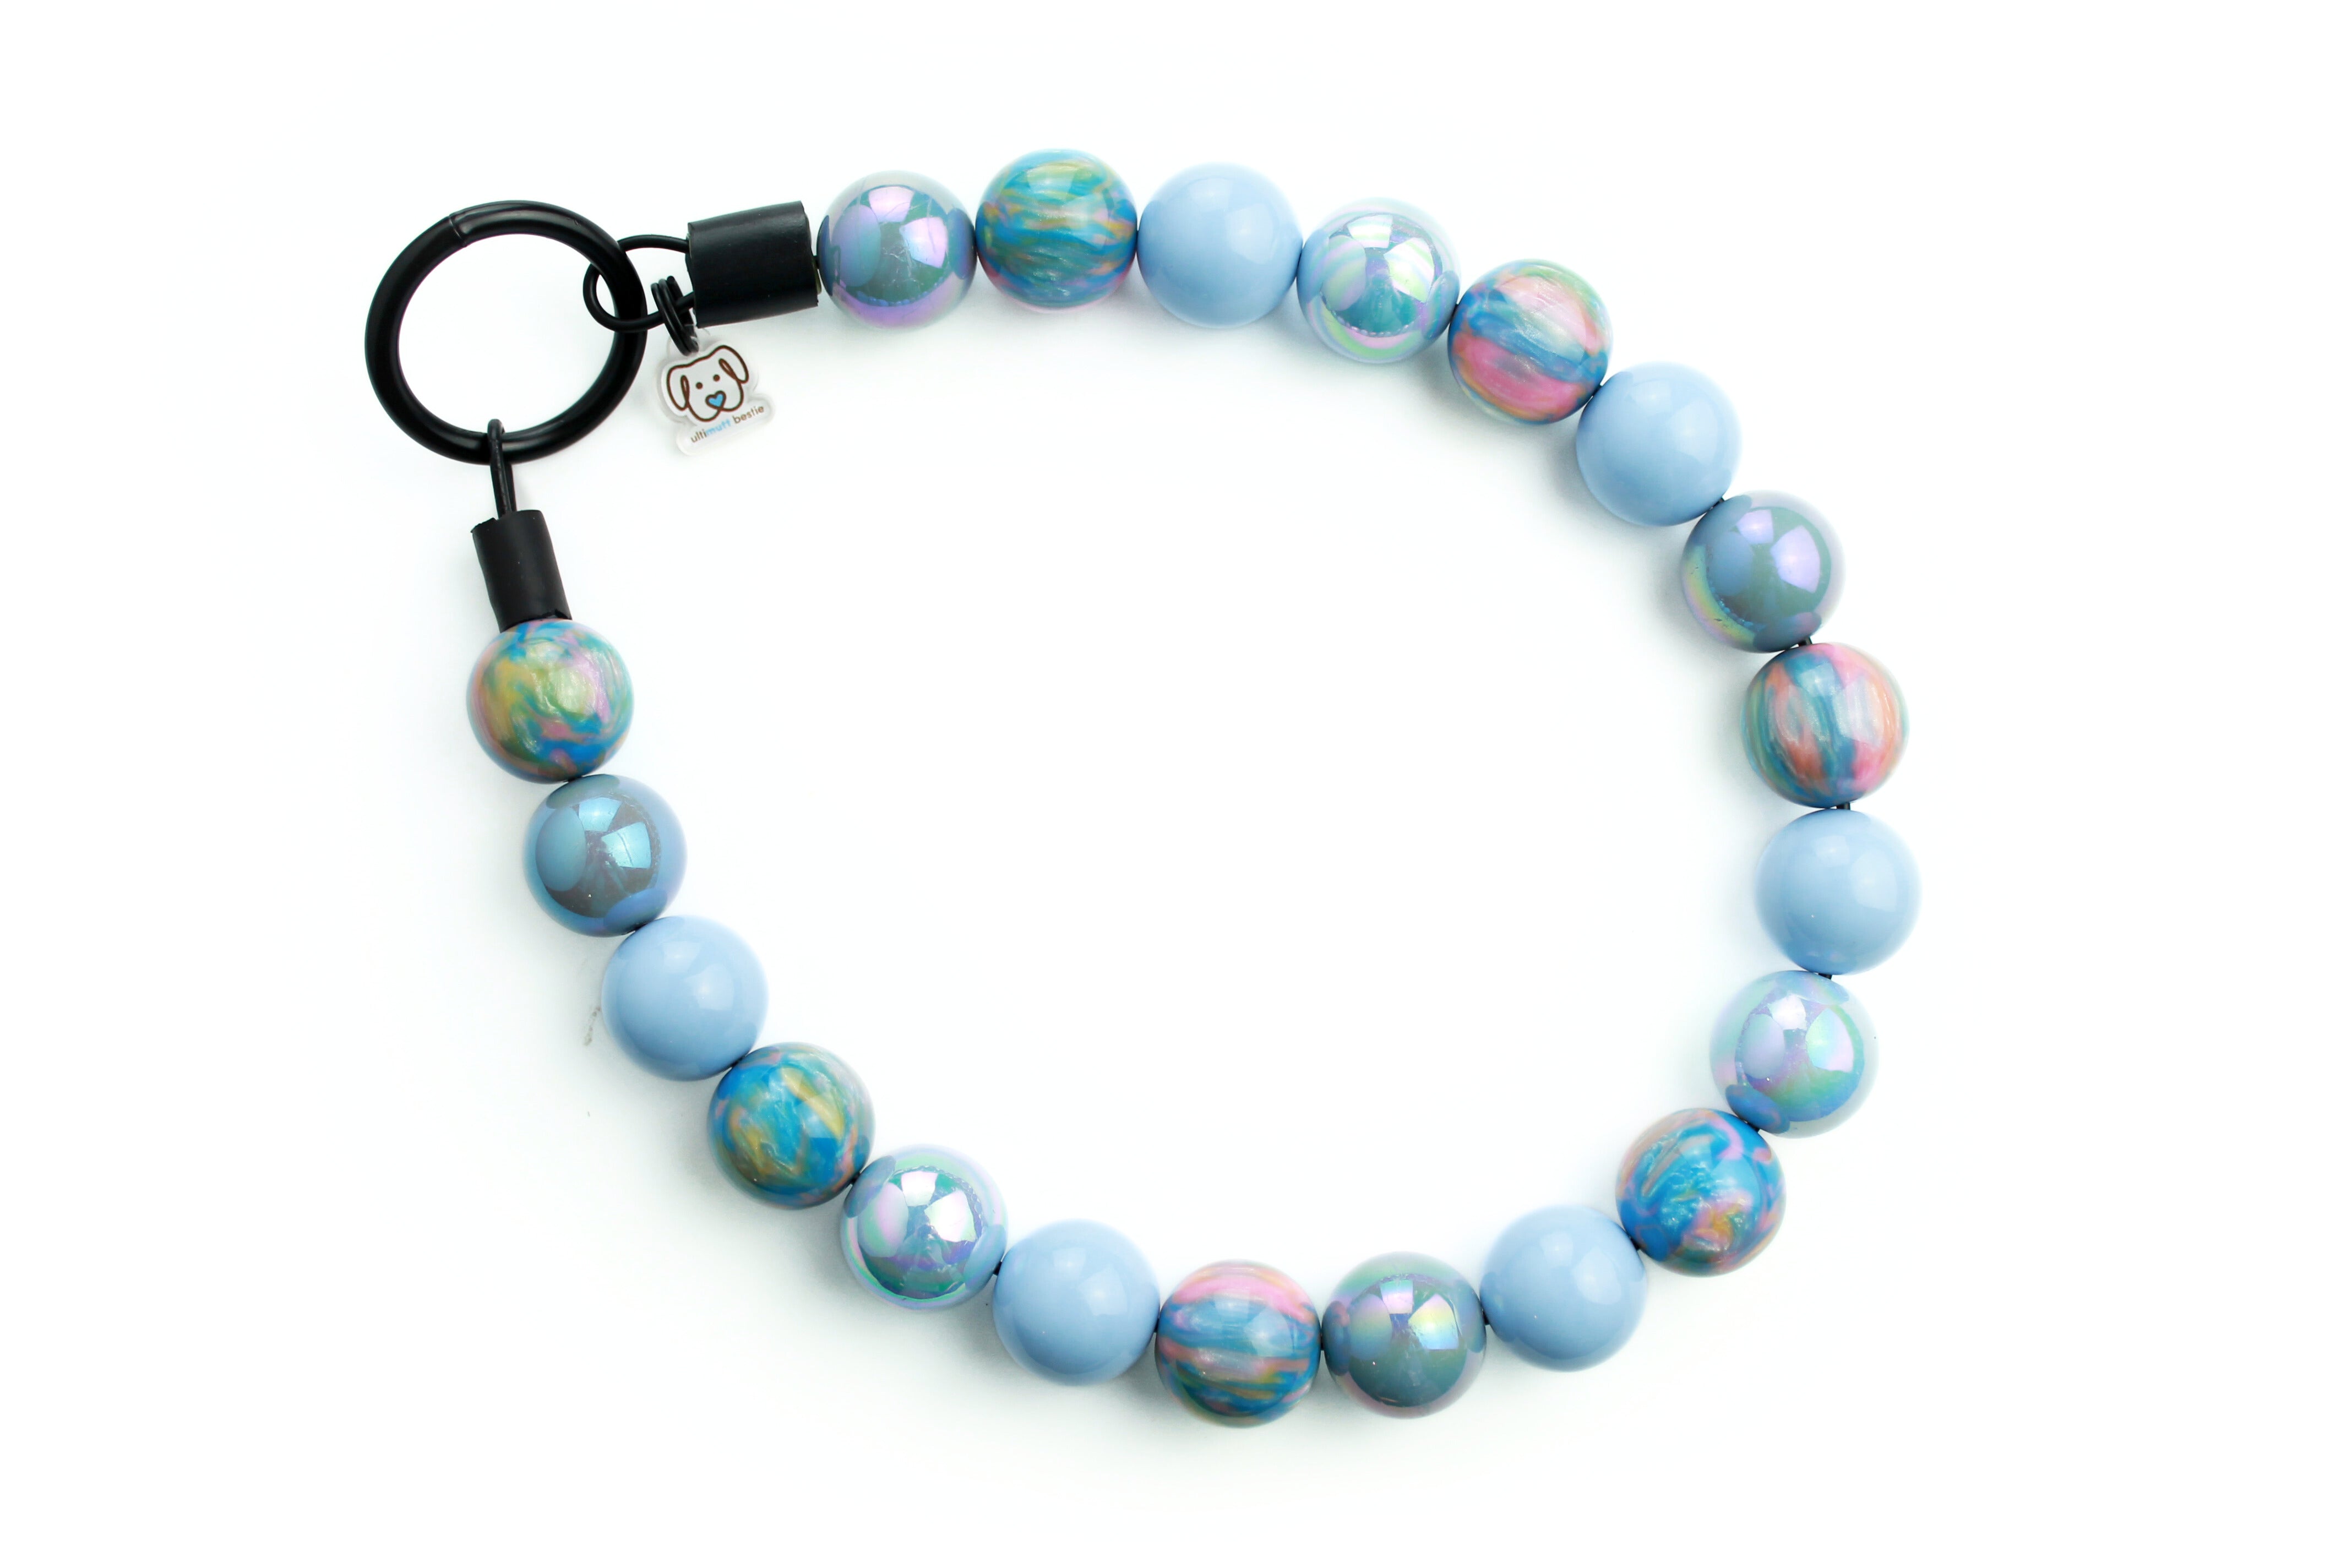 Beaded Dog Collar with baby blue and swirl beads